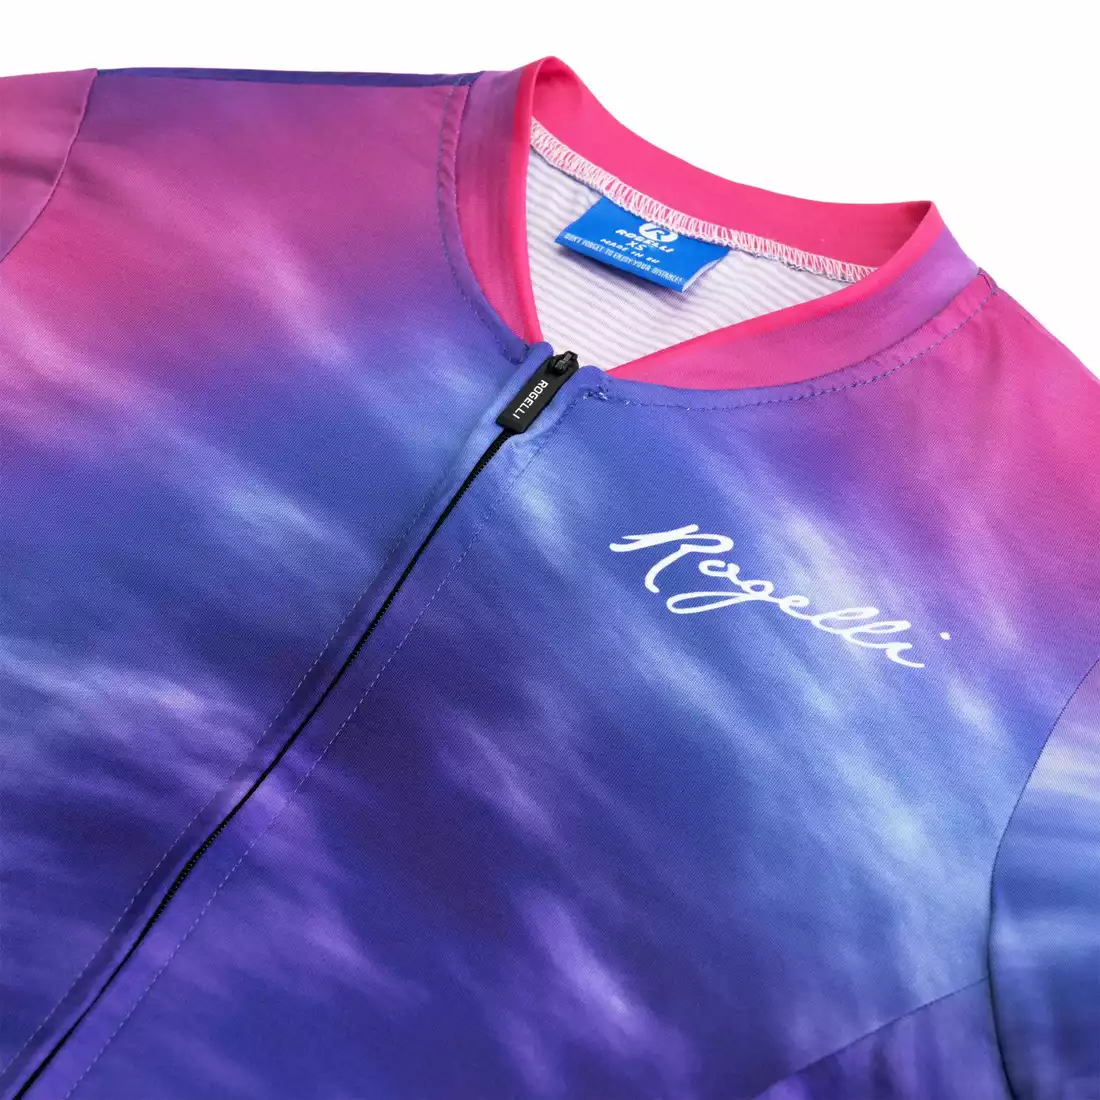 ROGELLI TIE DYE Women's cycling jersey, blue and pink